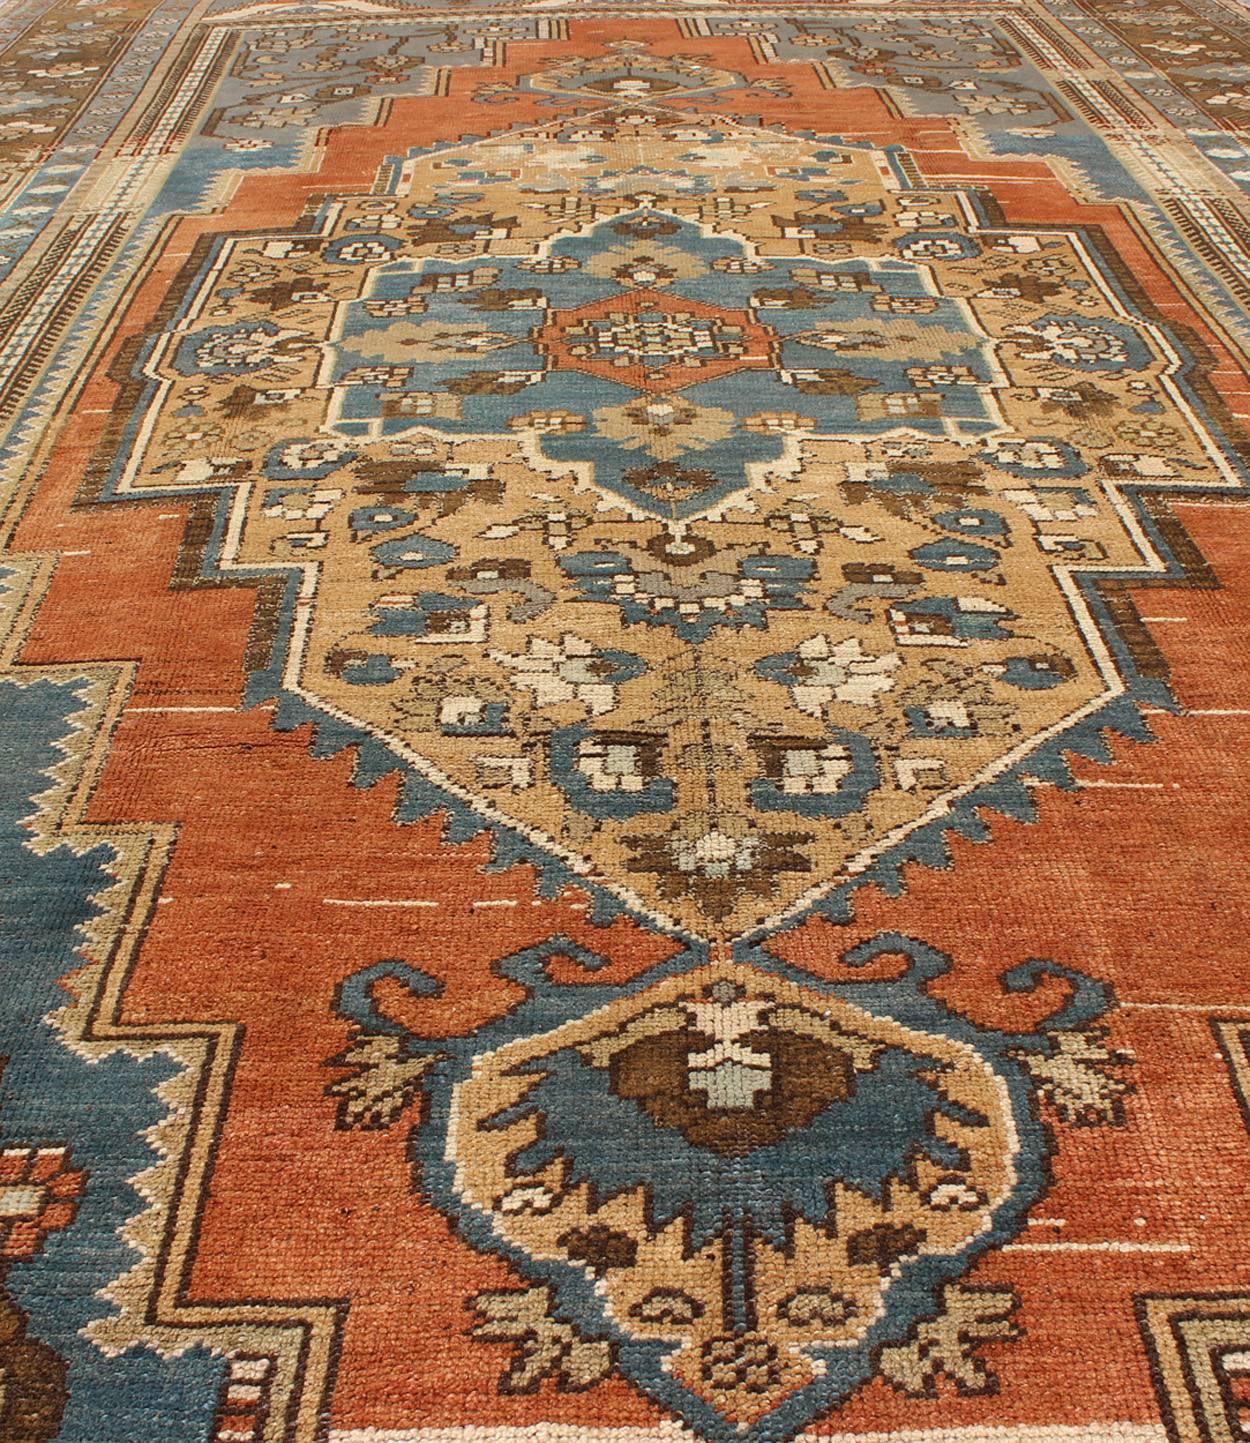 Antique Turkish Colorful Oushak Gallery Rug In Blue Brown & Terra-cotta For Sale 1